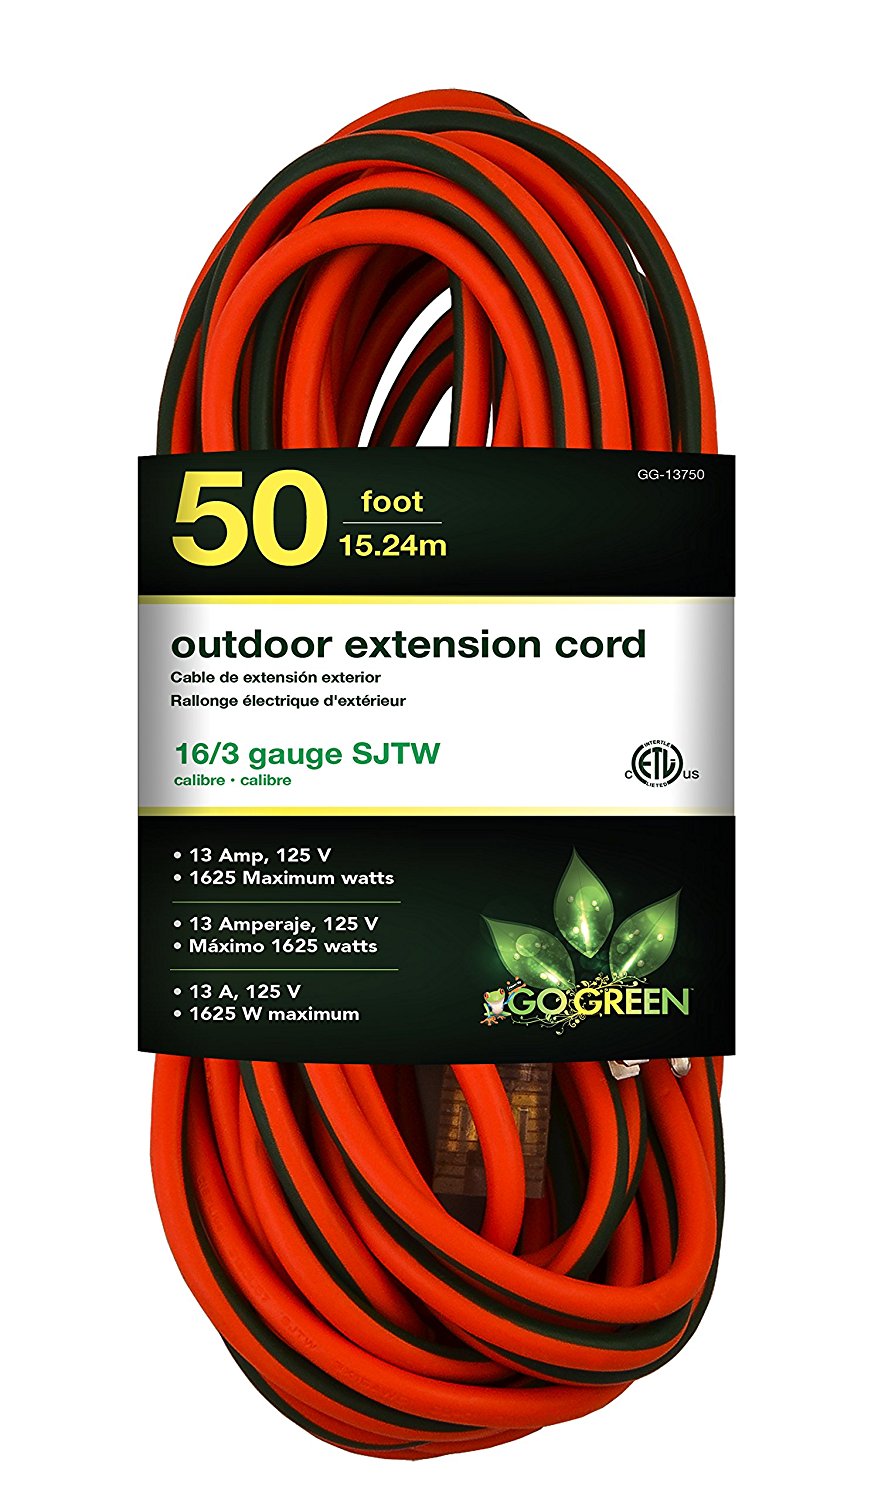 Go Green Power 50 ft outdoor extension cord for $12